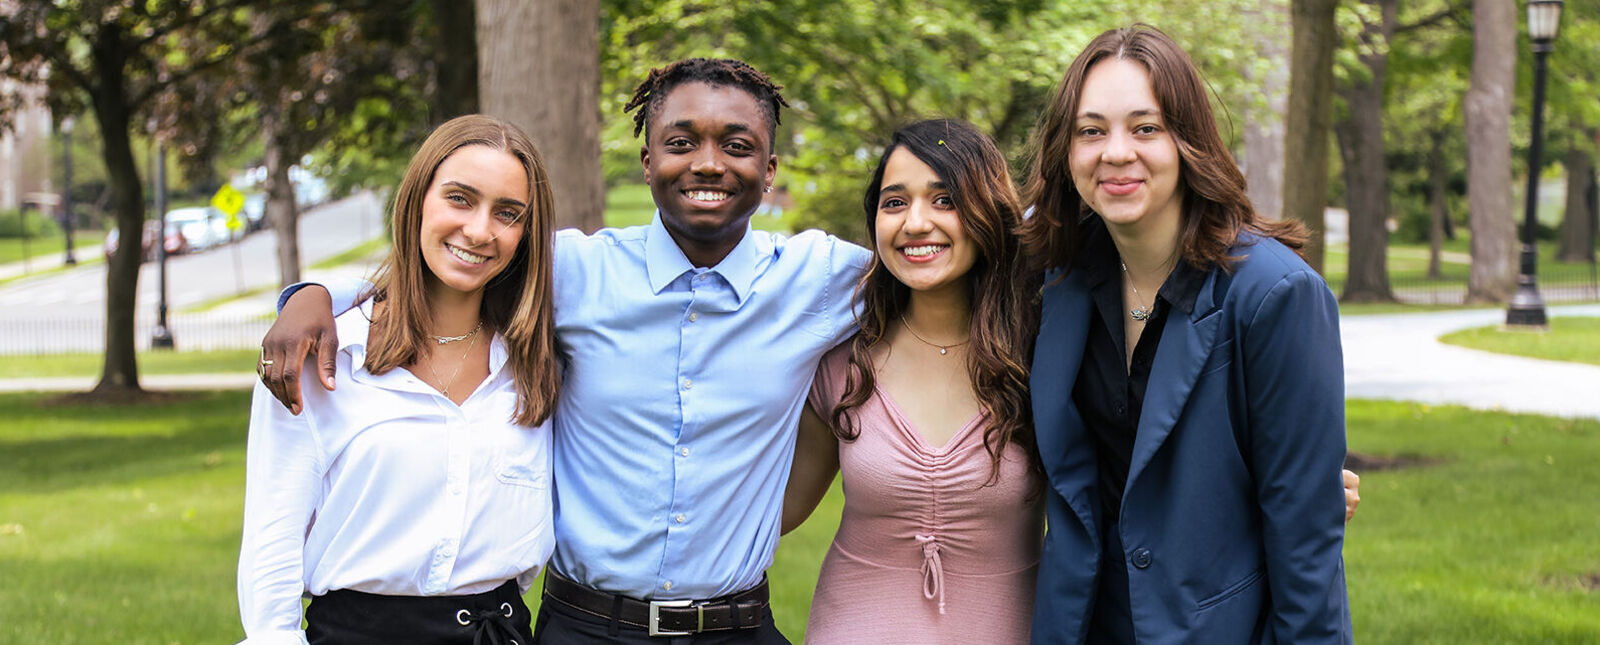 A male and three female business students pose for a picture together outside on the Elmira College campus